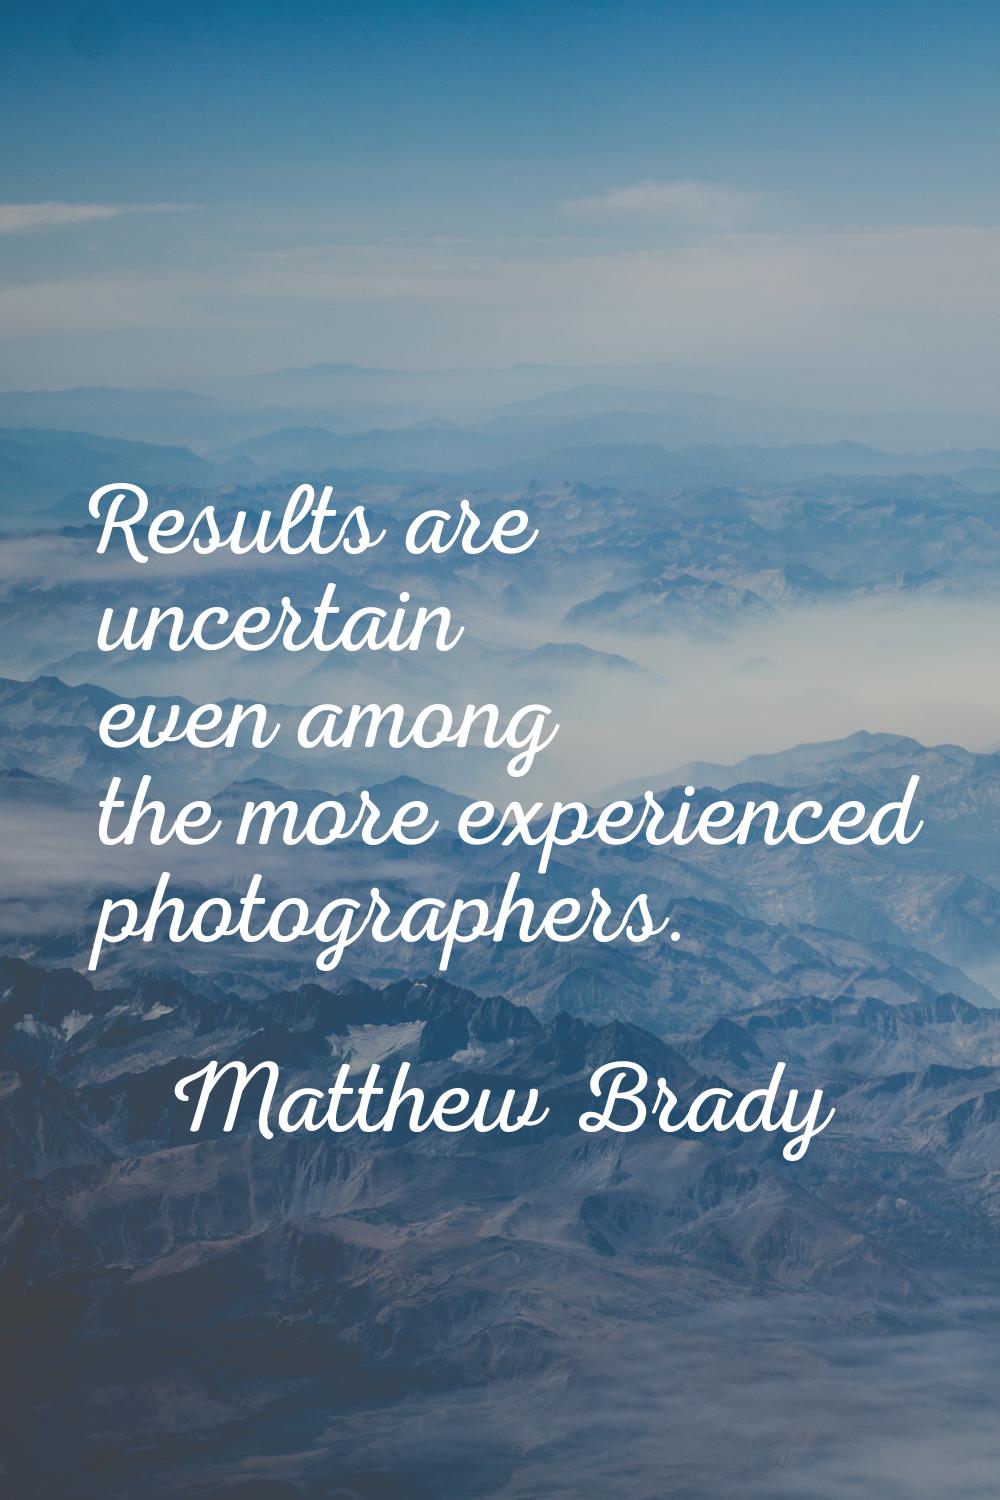 Results are uncertain even among the more experienced photographers.